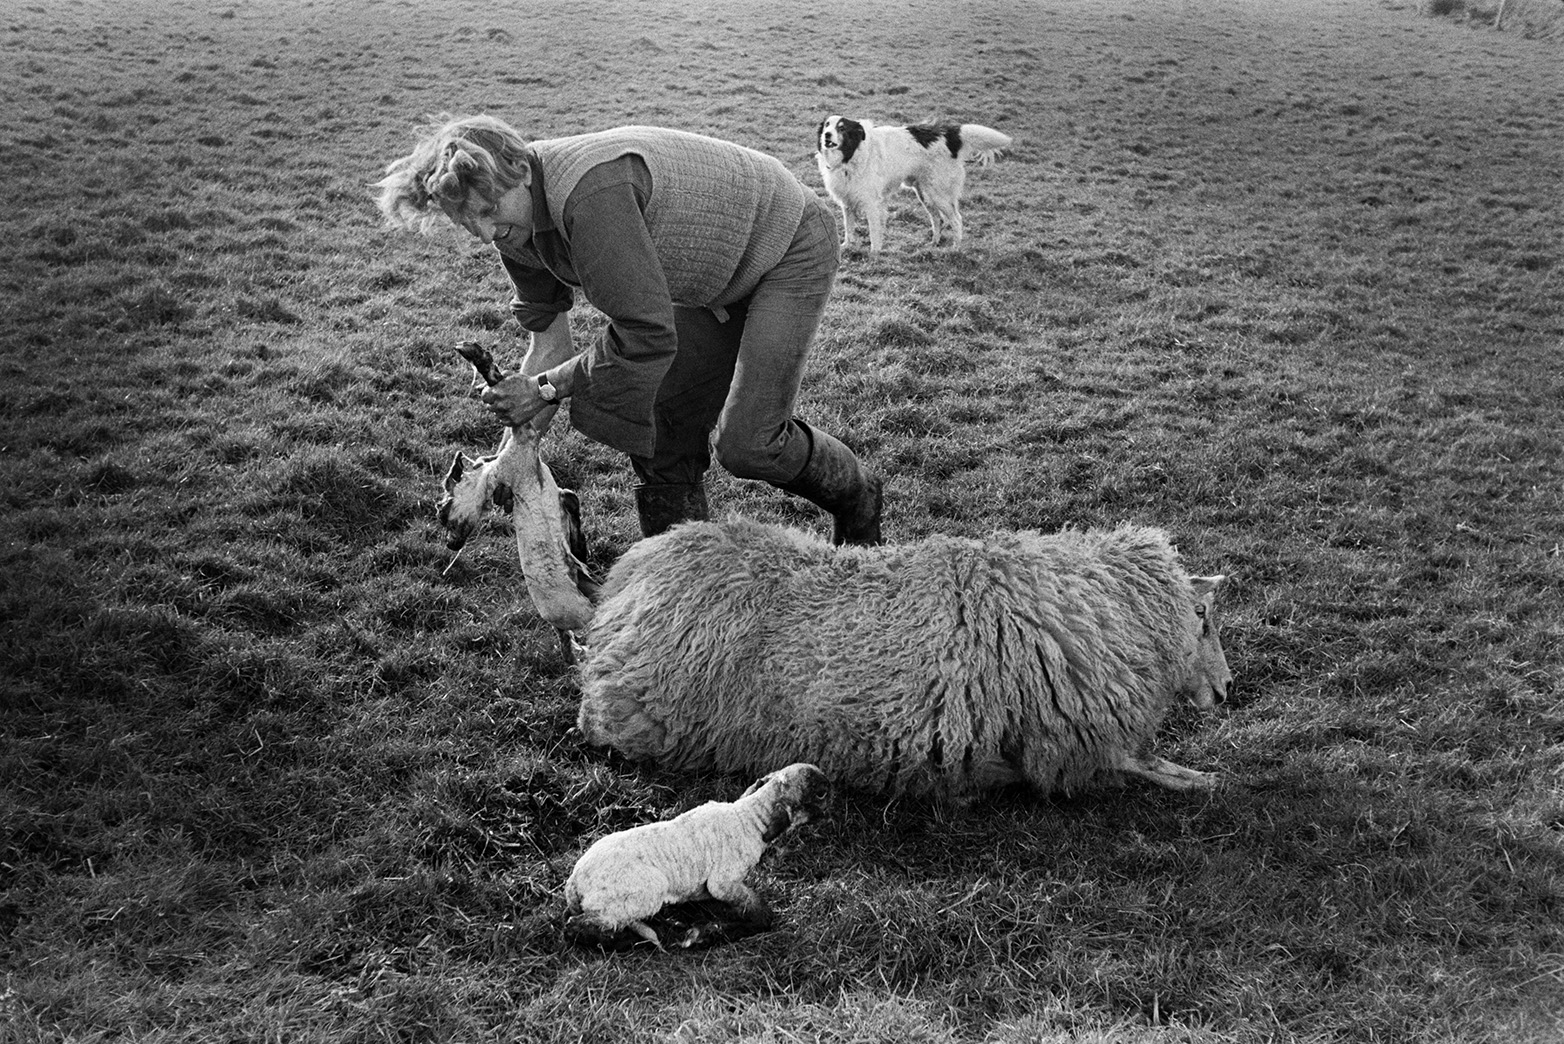 Man helping a ewe give birth to twin lambs in a field at Mill Road Farm, Beaford. A dog is watching. The farm was also known as Jeffrys.